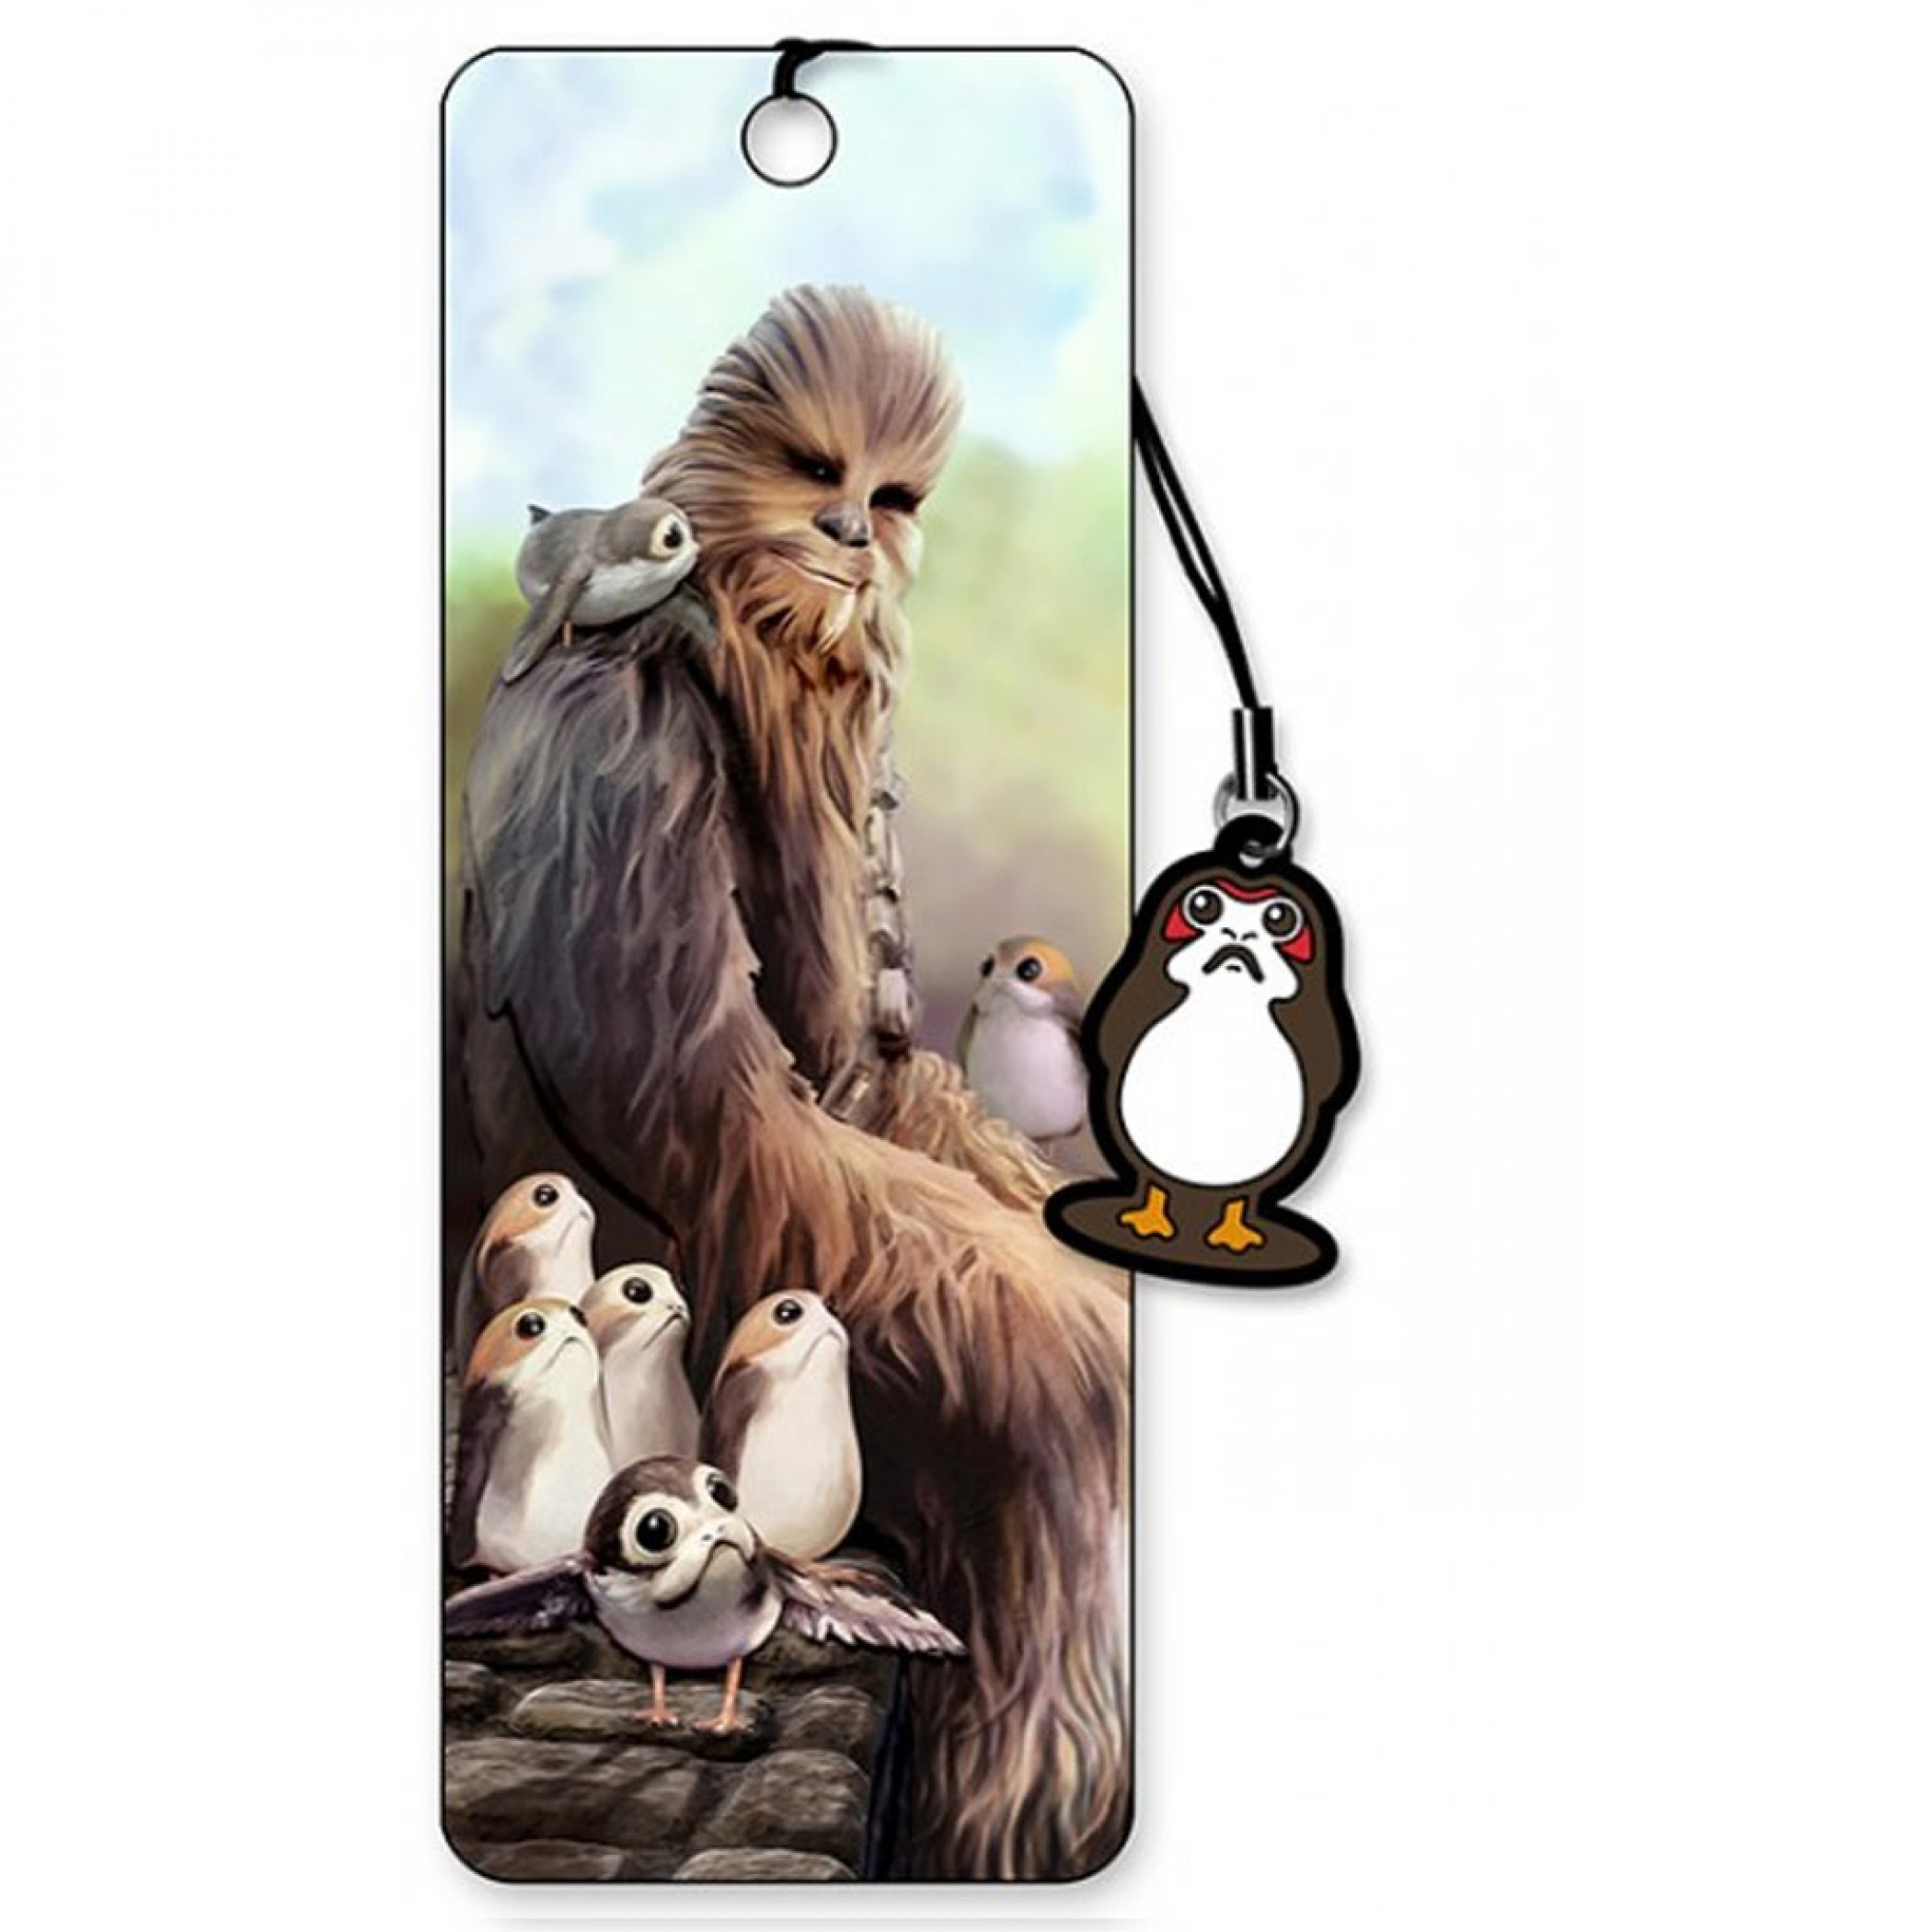 Chewbacca 3D Moving Image Bookmark